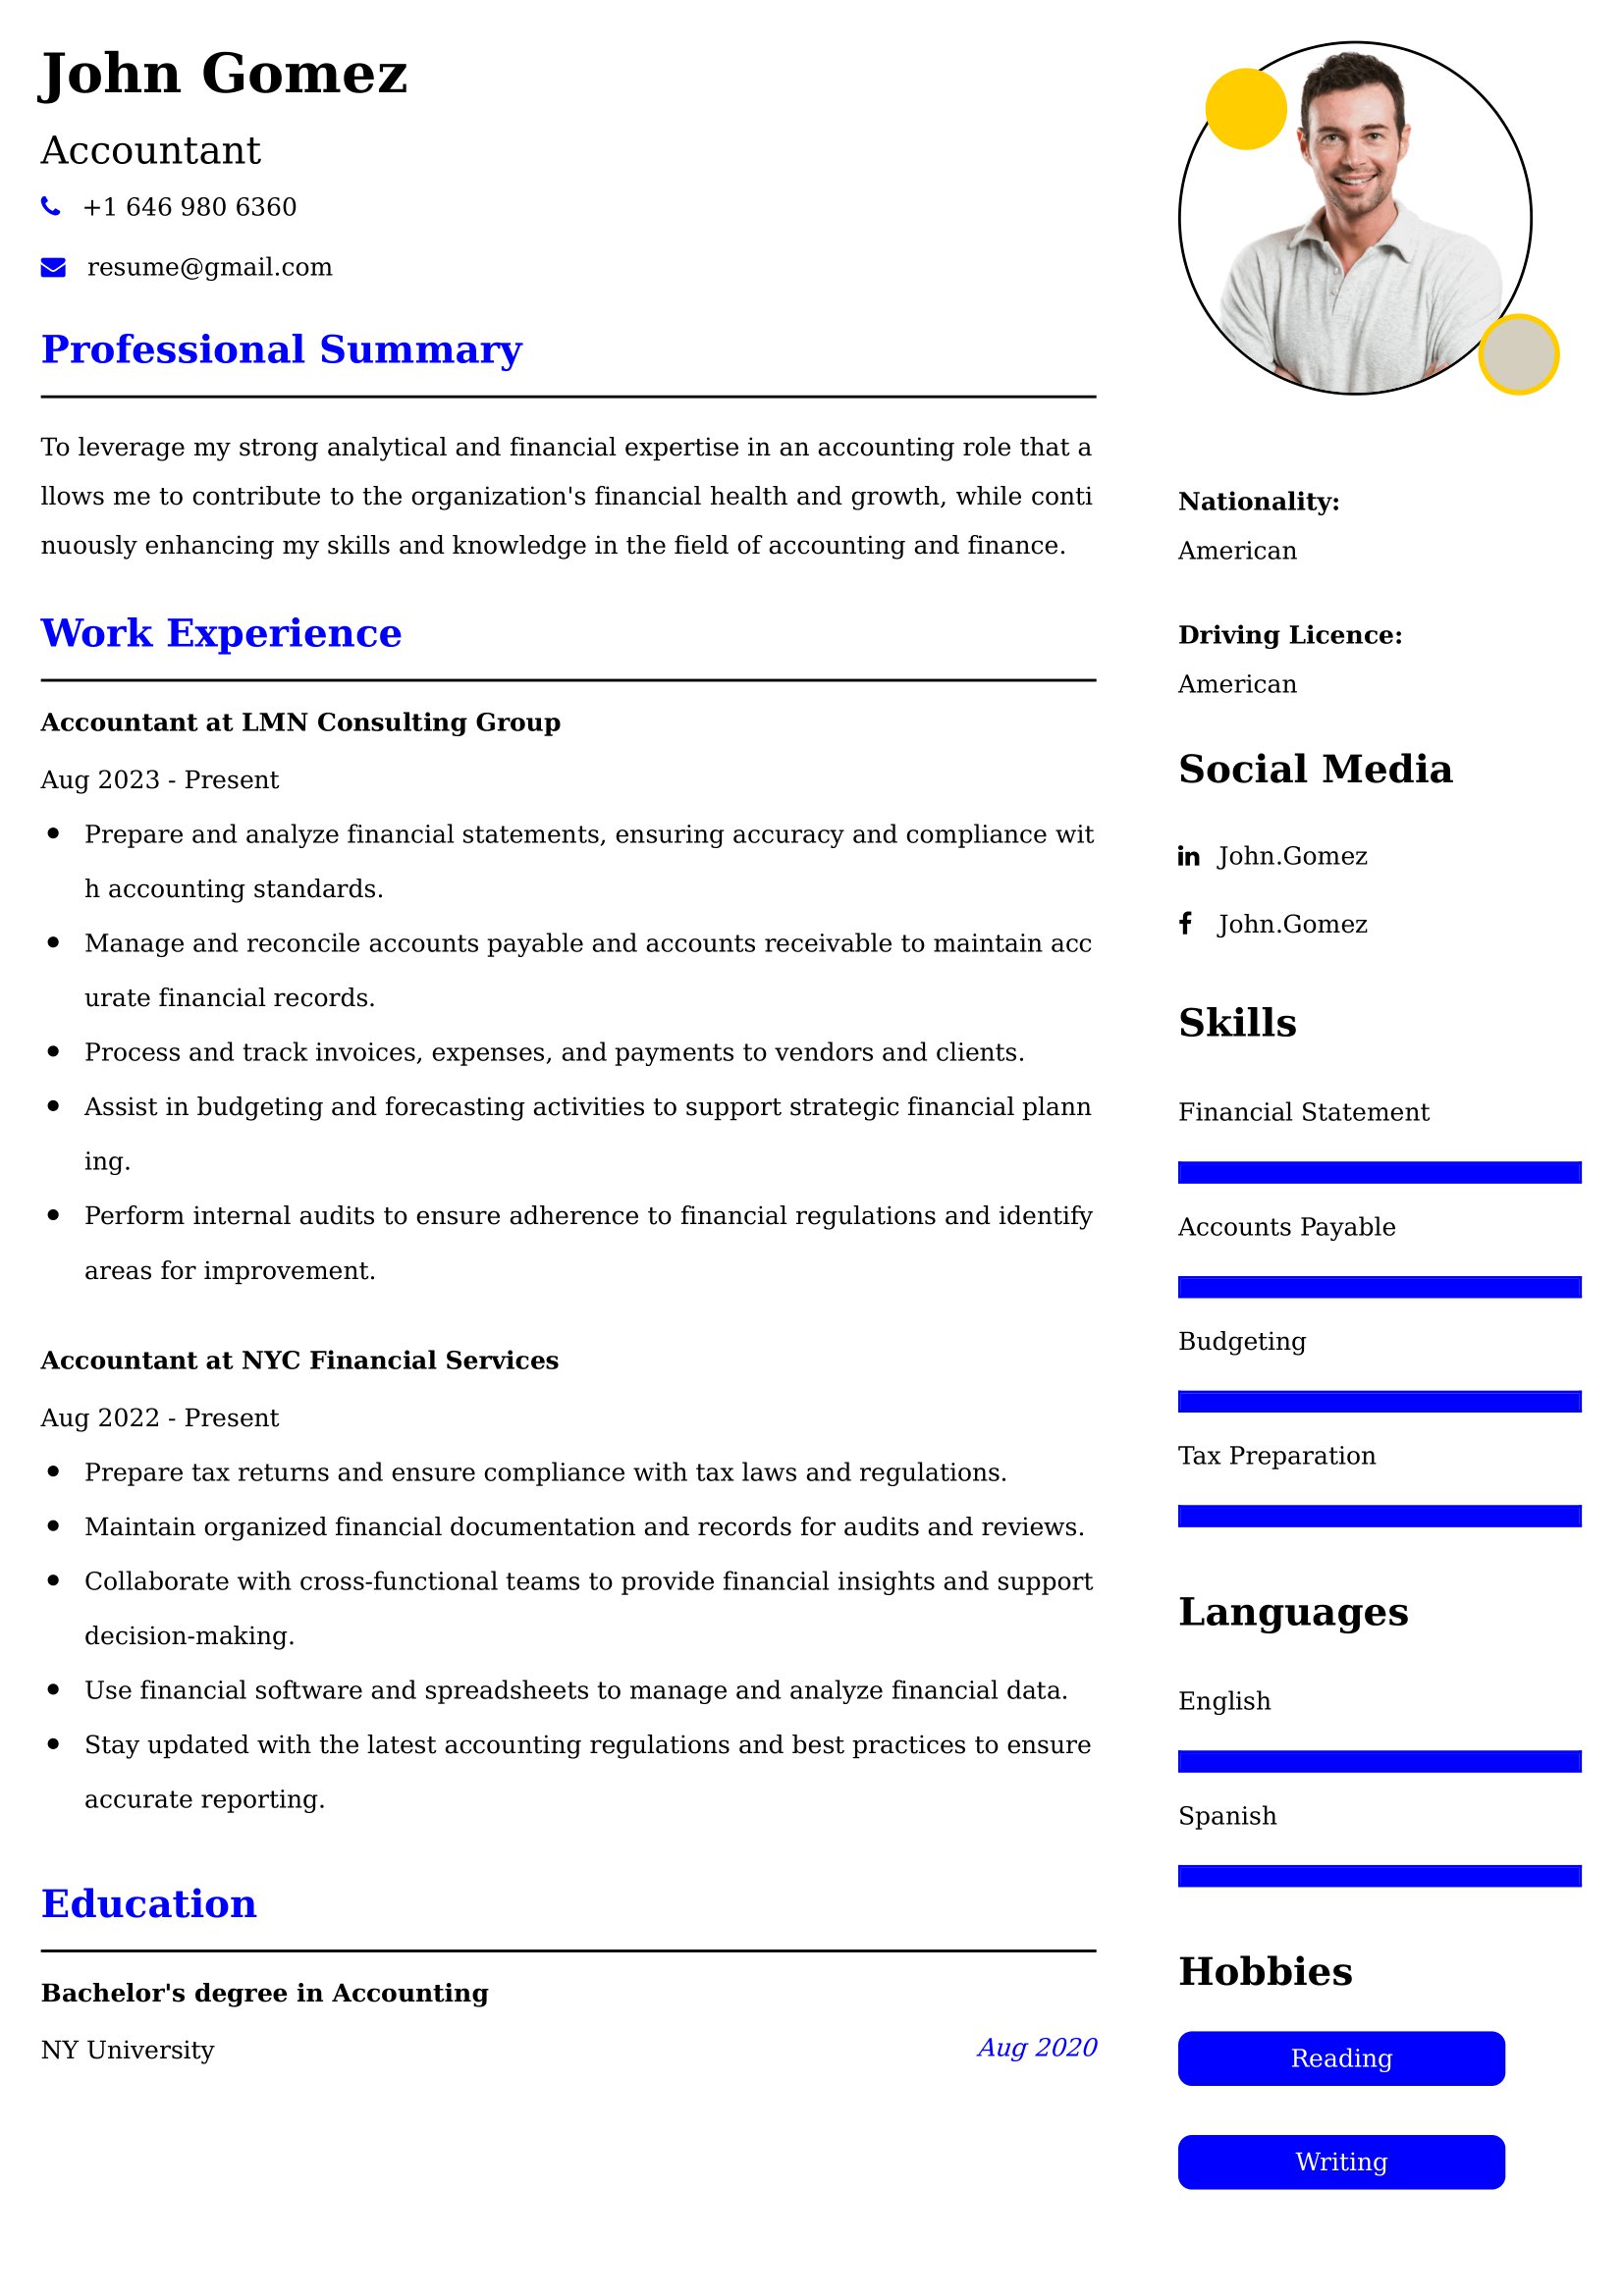 Professional Accounting Resume Examples | 45+ ATS-Optimized Samples and Guide